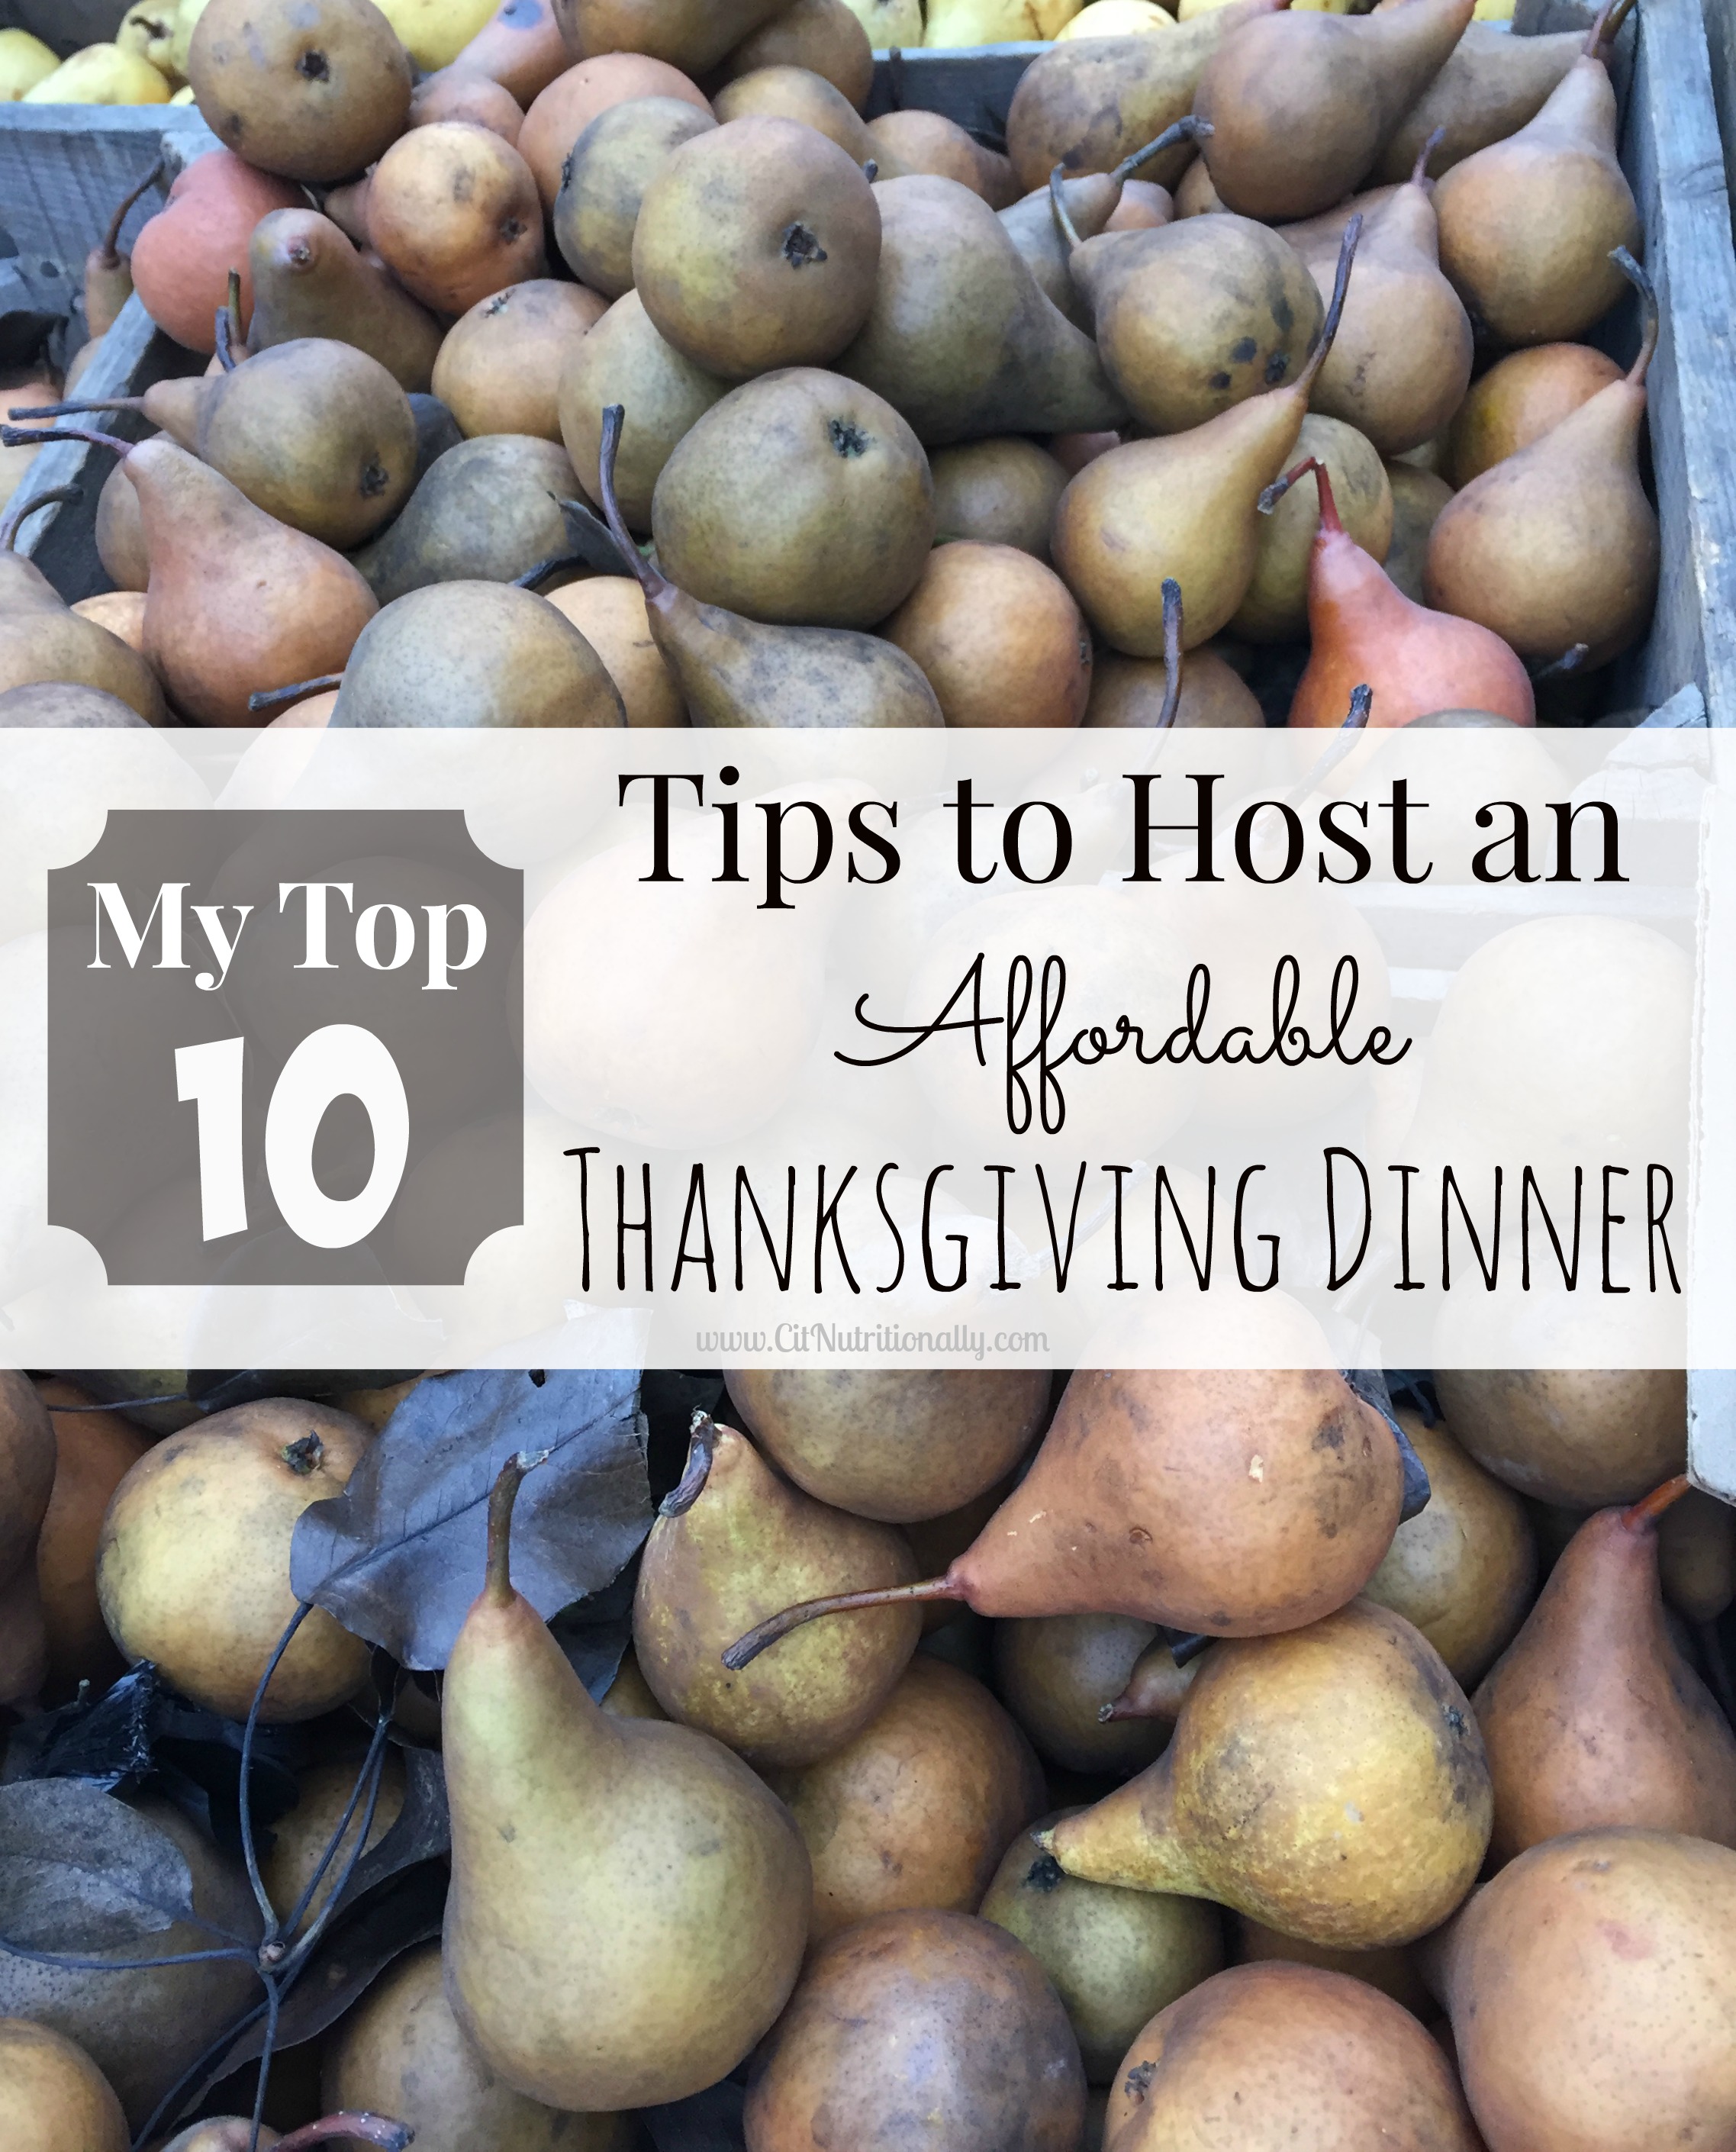 {Frugal Friday} My Top 10 Tips to Host an Affordable Thanksgiving Dinner | C it Nutritionally